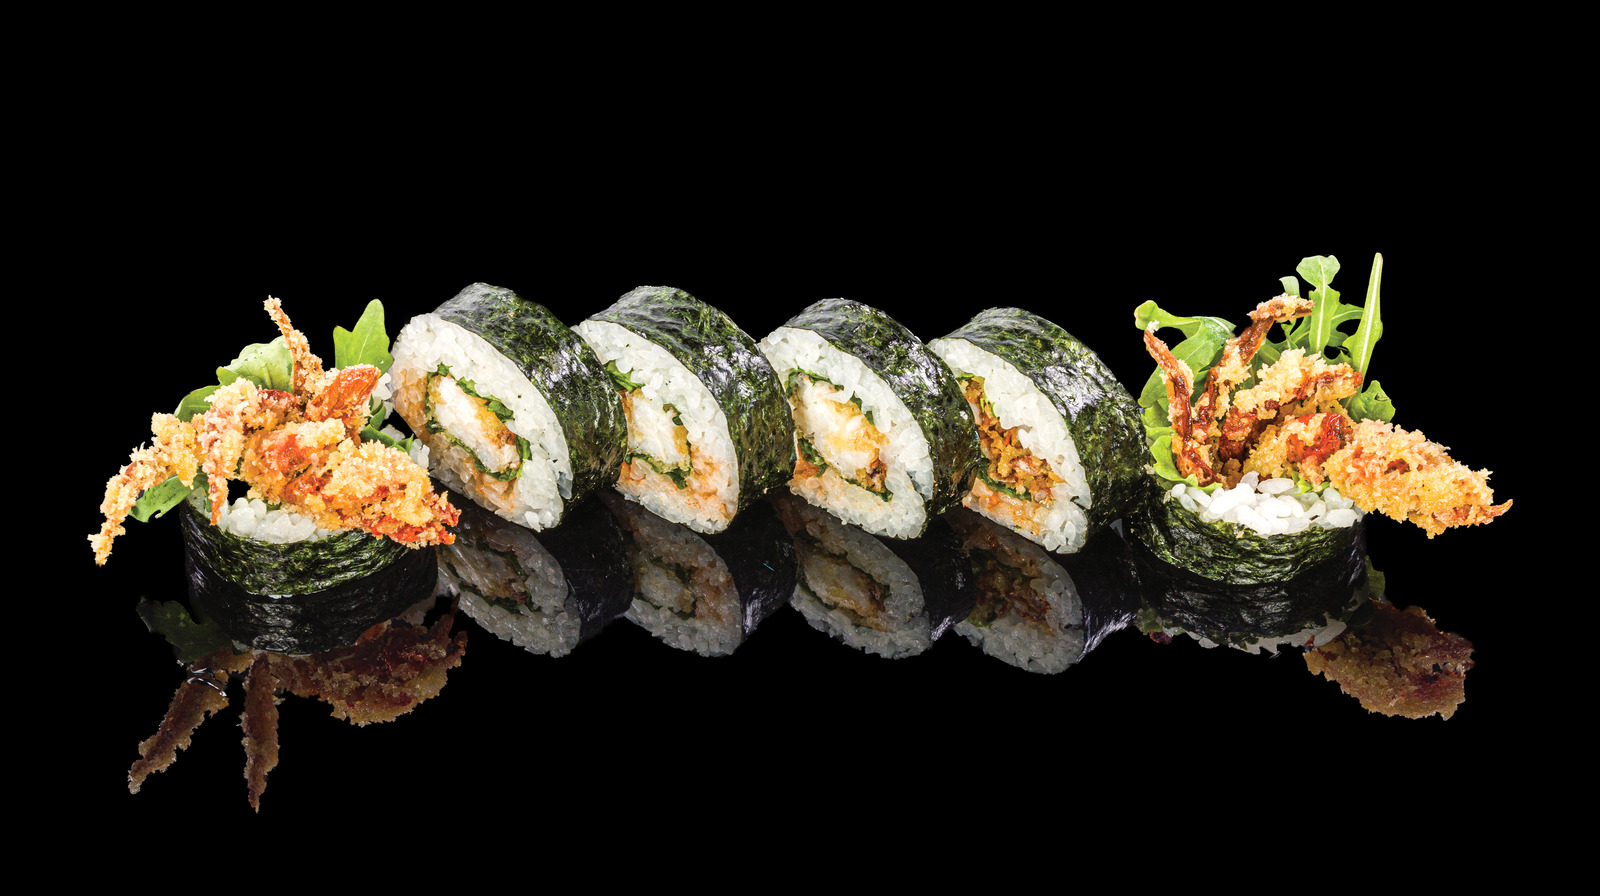 Spider Roll: What You Should Know Before Ordering